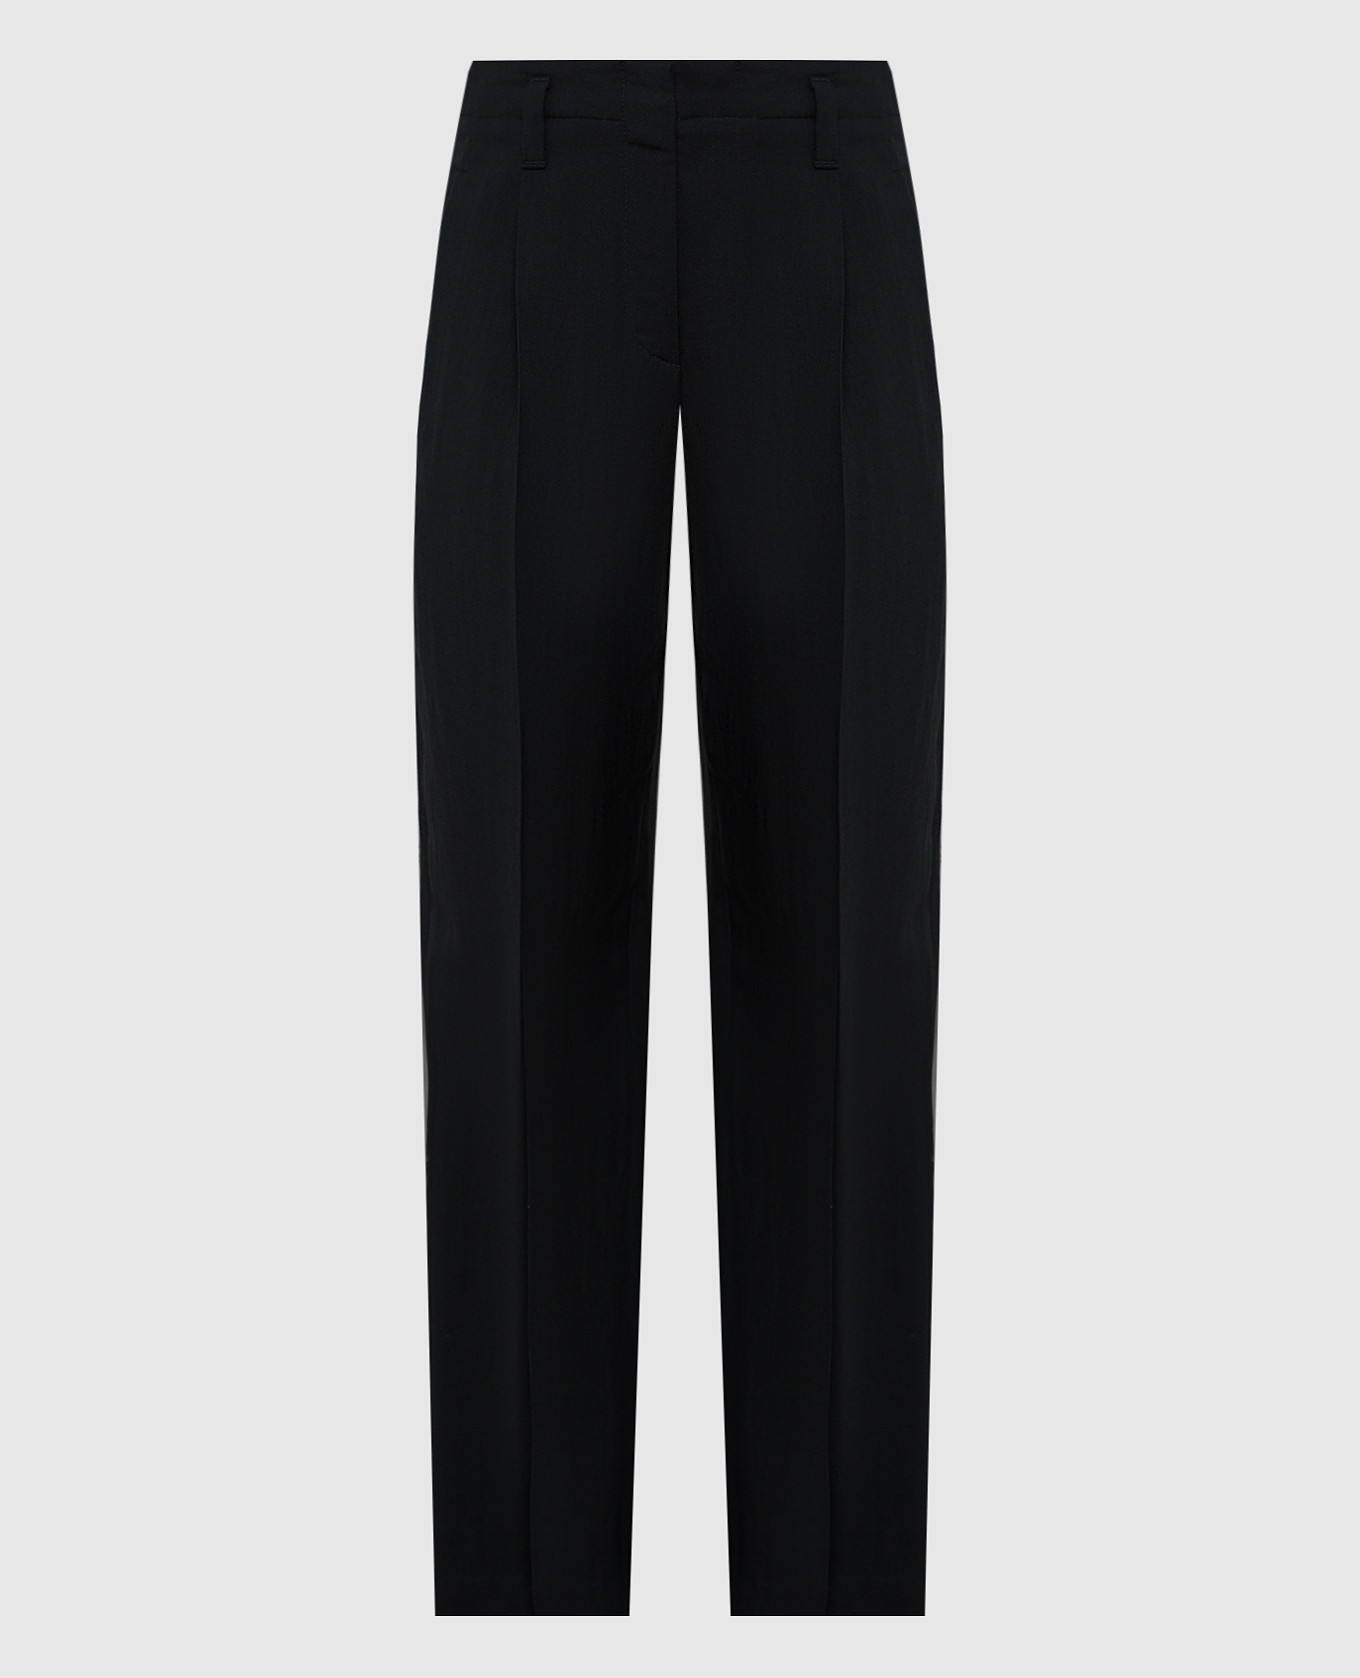 Black pants with linen